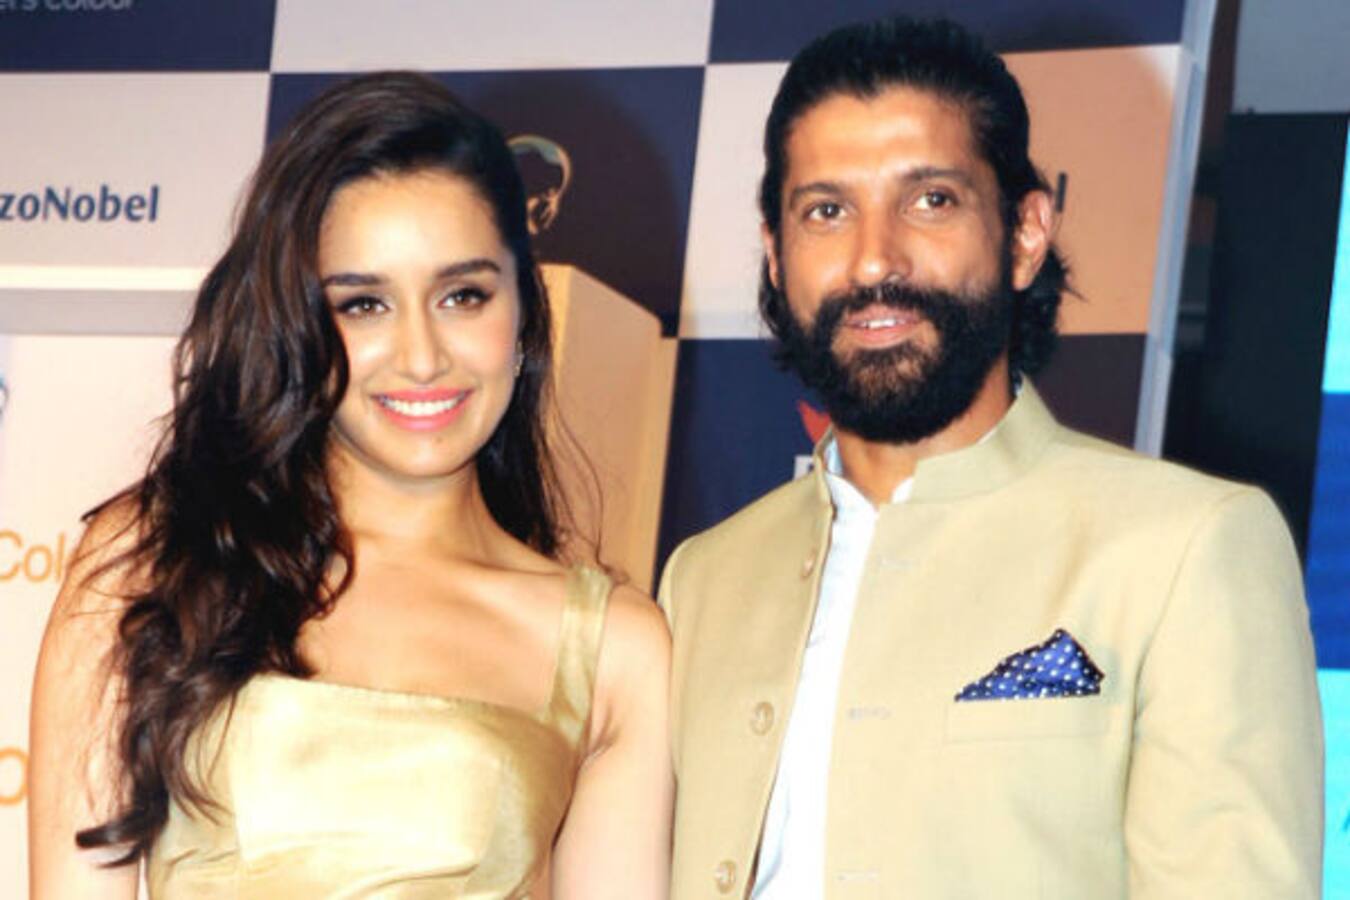 Ahem! Shraddha Kapoor and Farhan Akhtar get NAUGHTY at a party - are they confirming dating rumours?